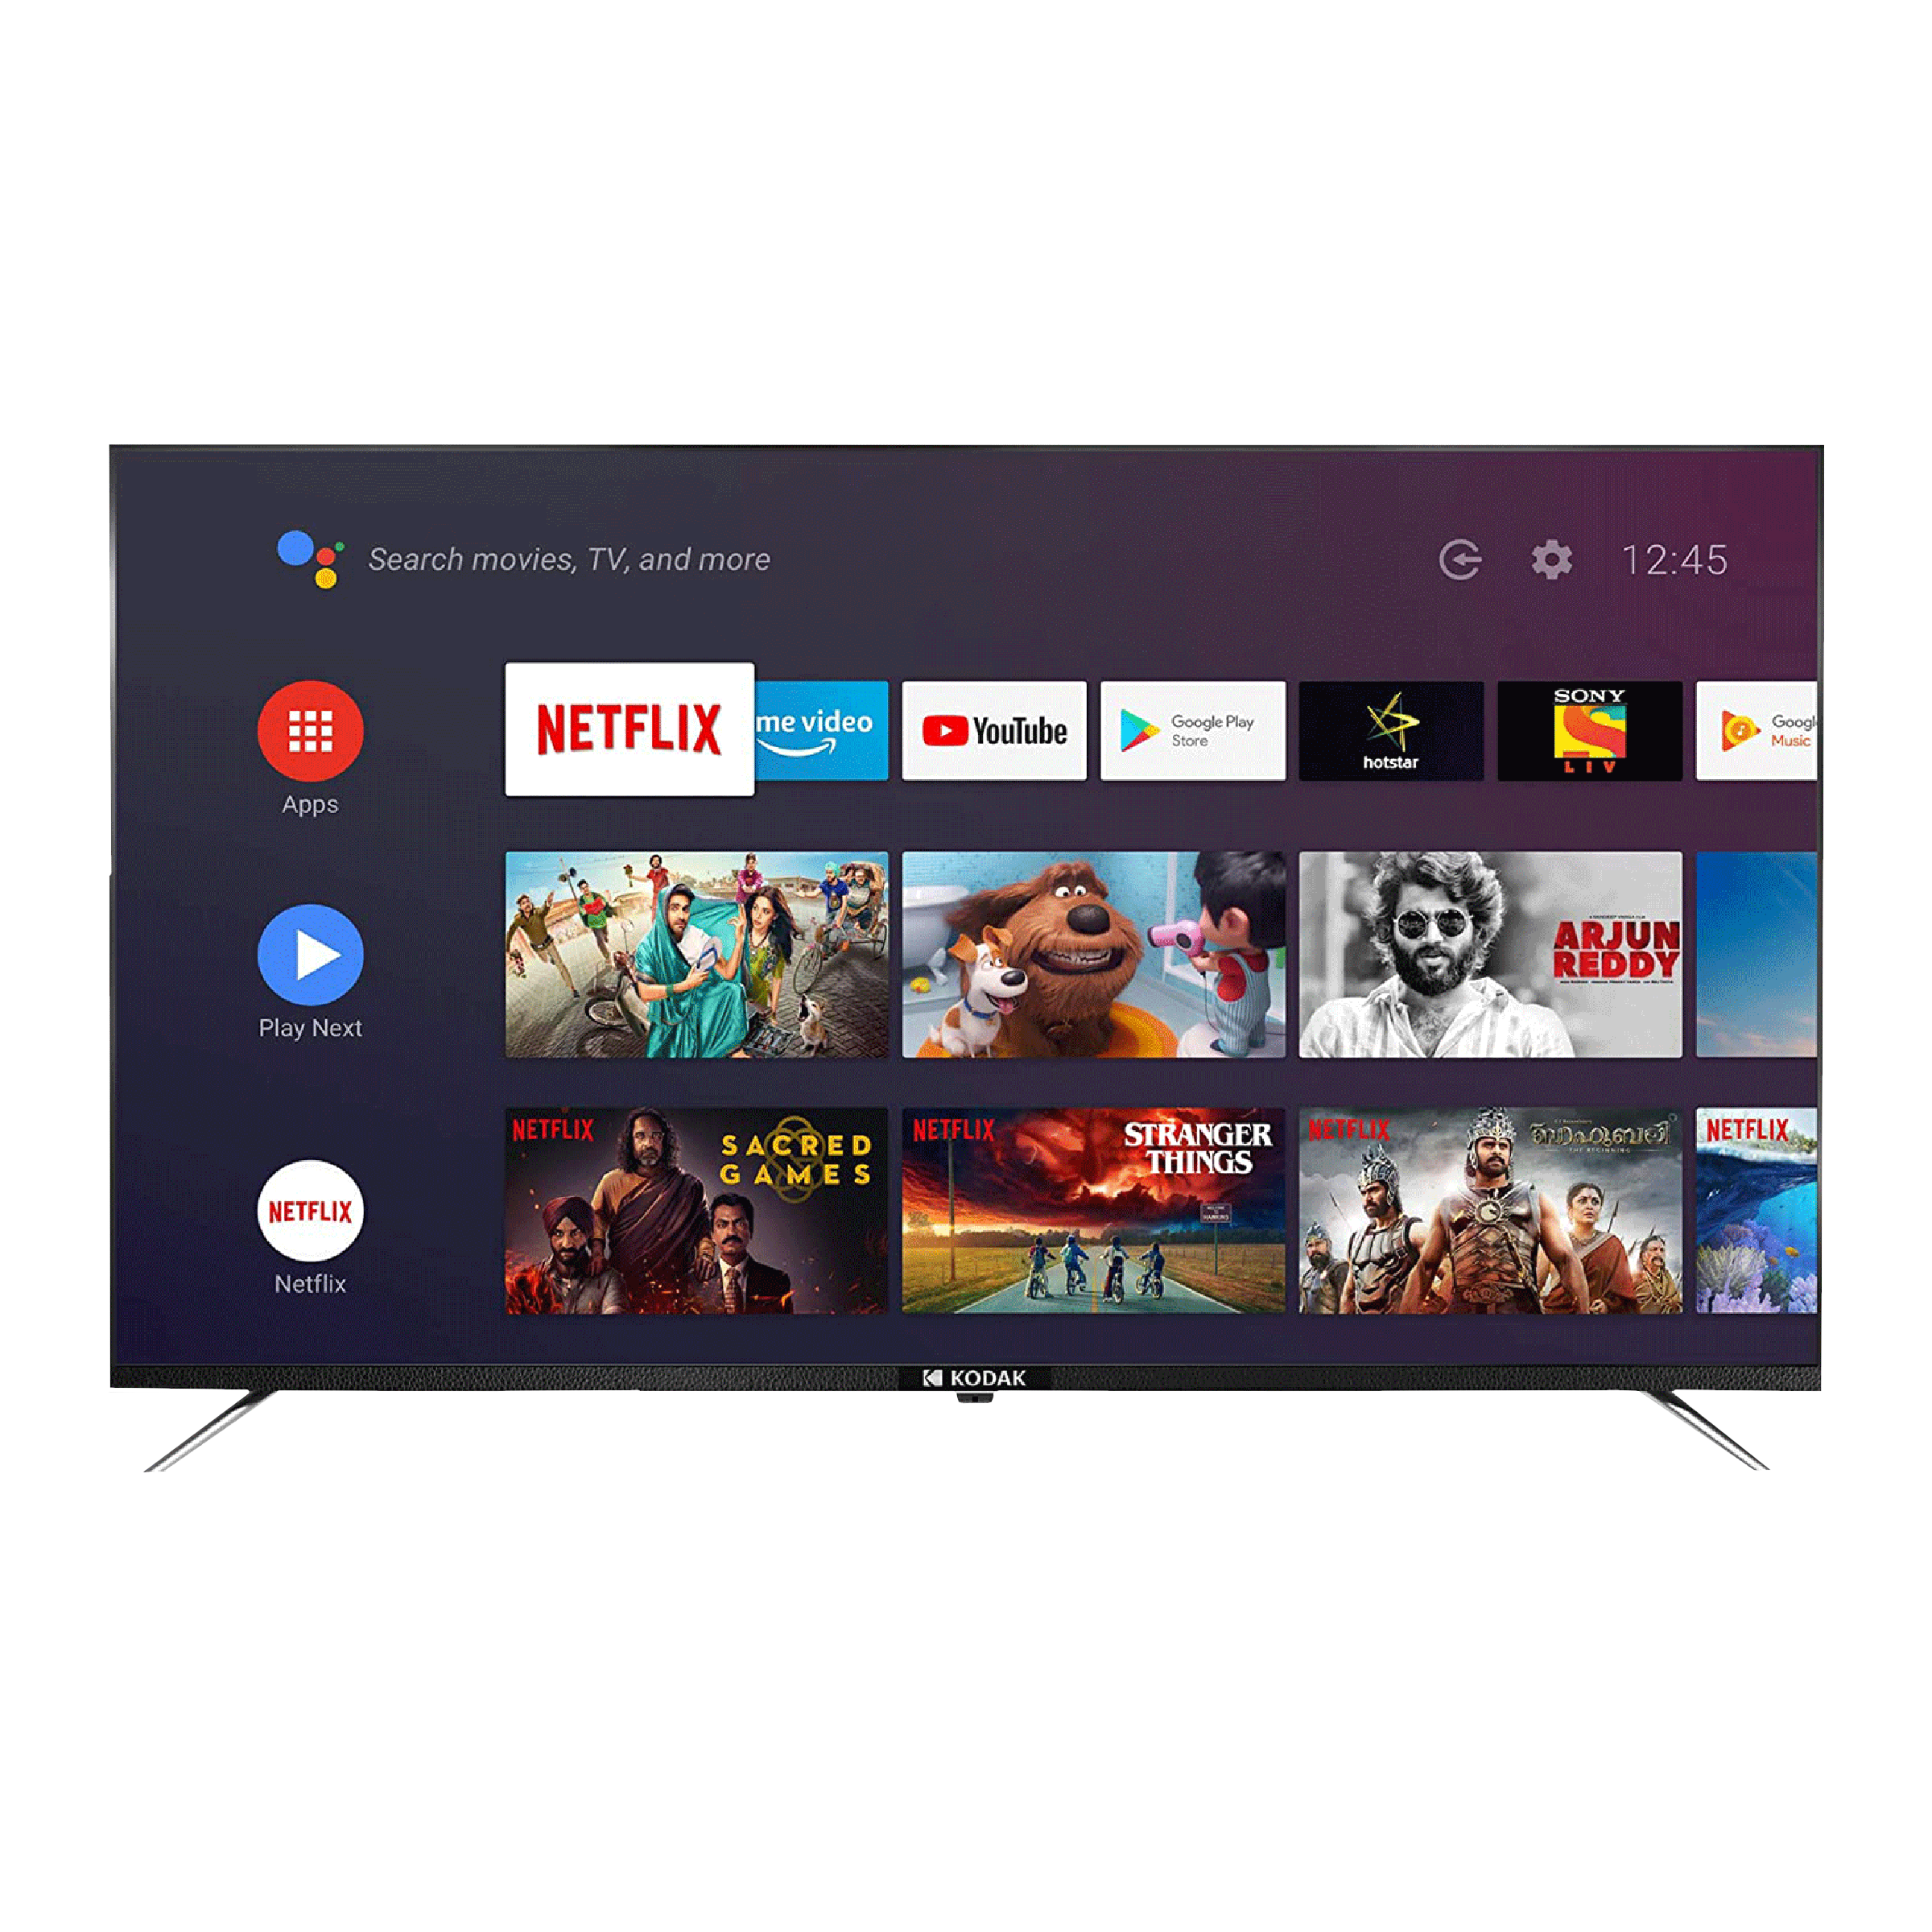 Kodak CA Series 139 cm (55 inch) 4K Ultra HD LED Android TV with Google Assistant (2020 model)_1